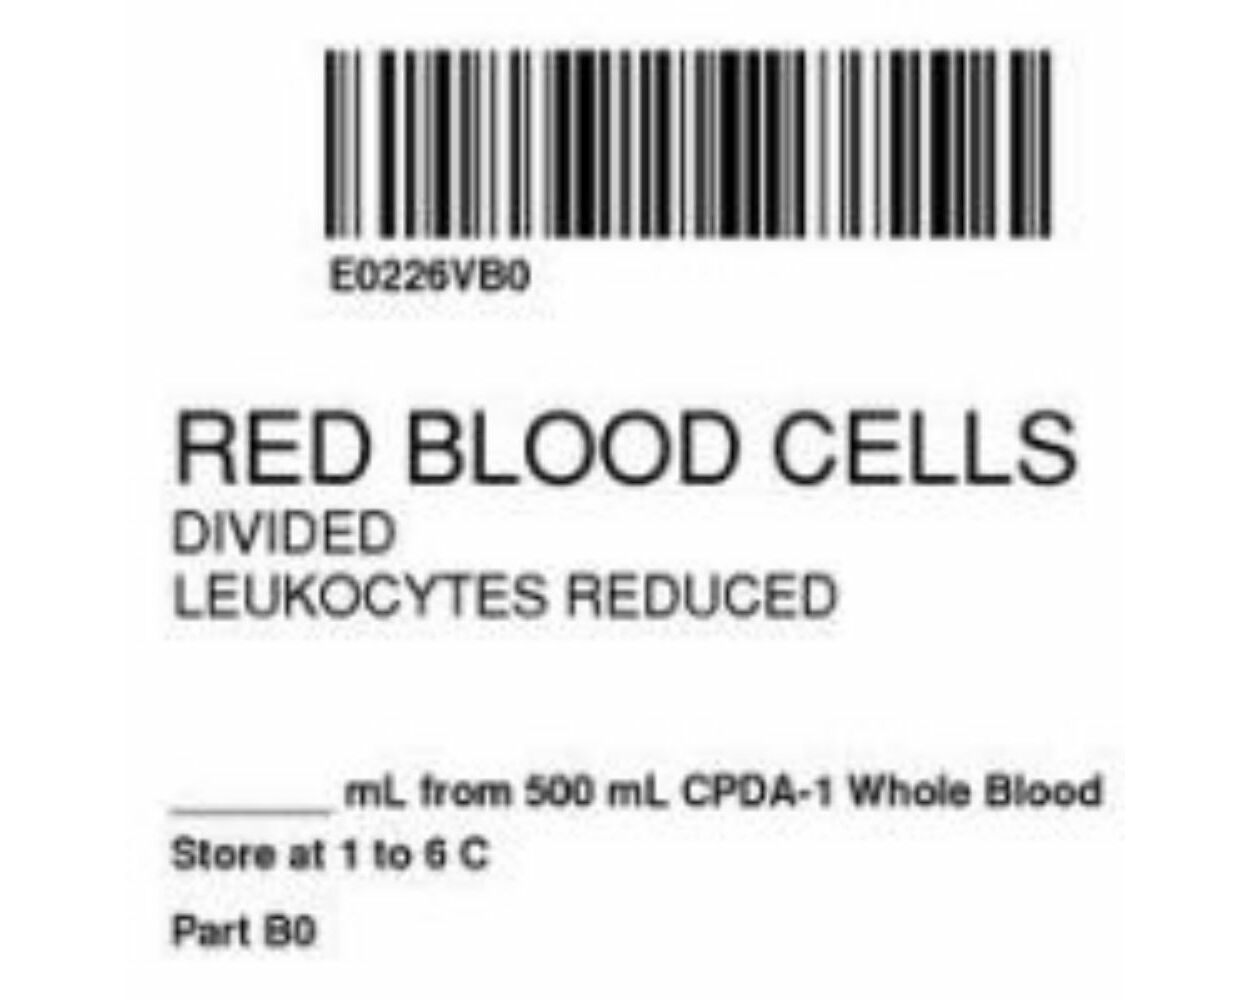 Blood Bank Labels Products, Supplies and Equipment